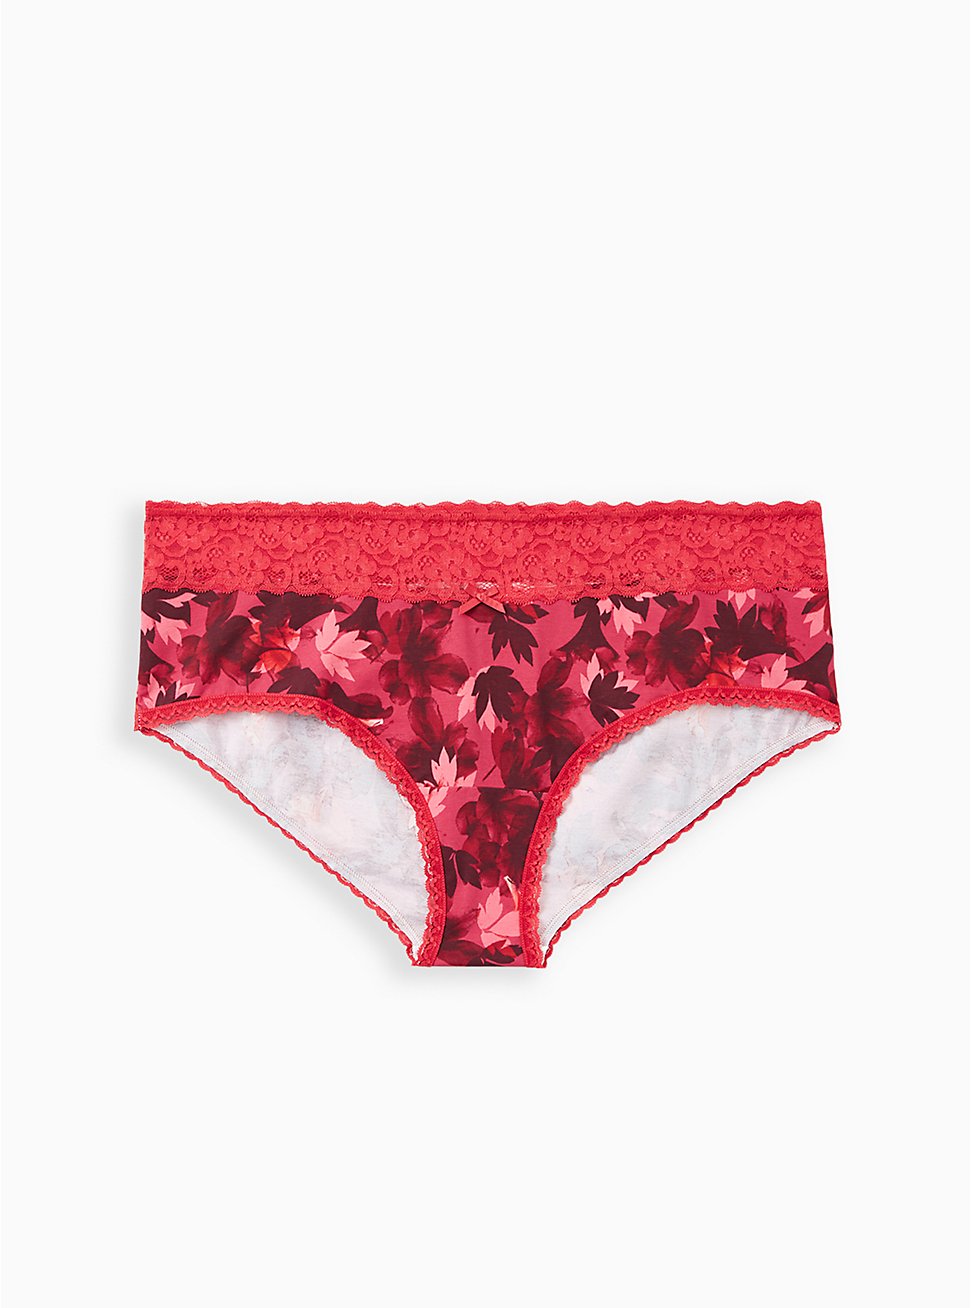 Wide Lace Trim Cheeky Panty - Cotton Blooms Red, DRAMATIC BLOOMS RED  , hi-res